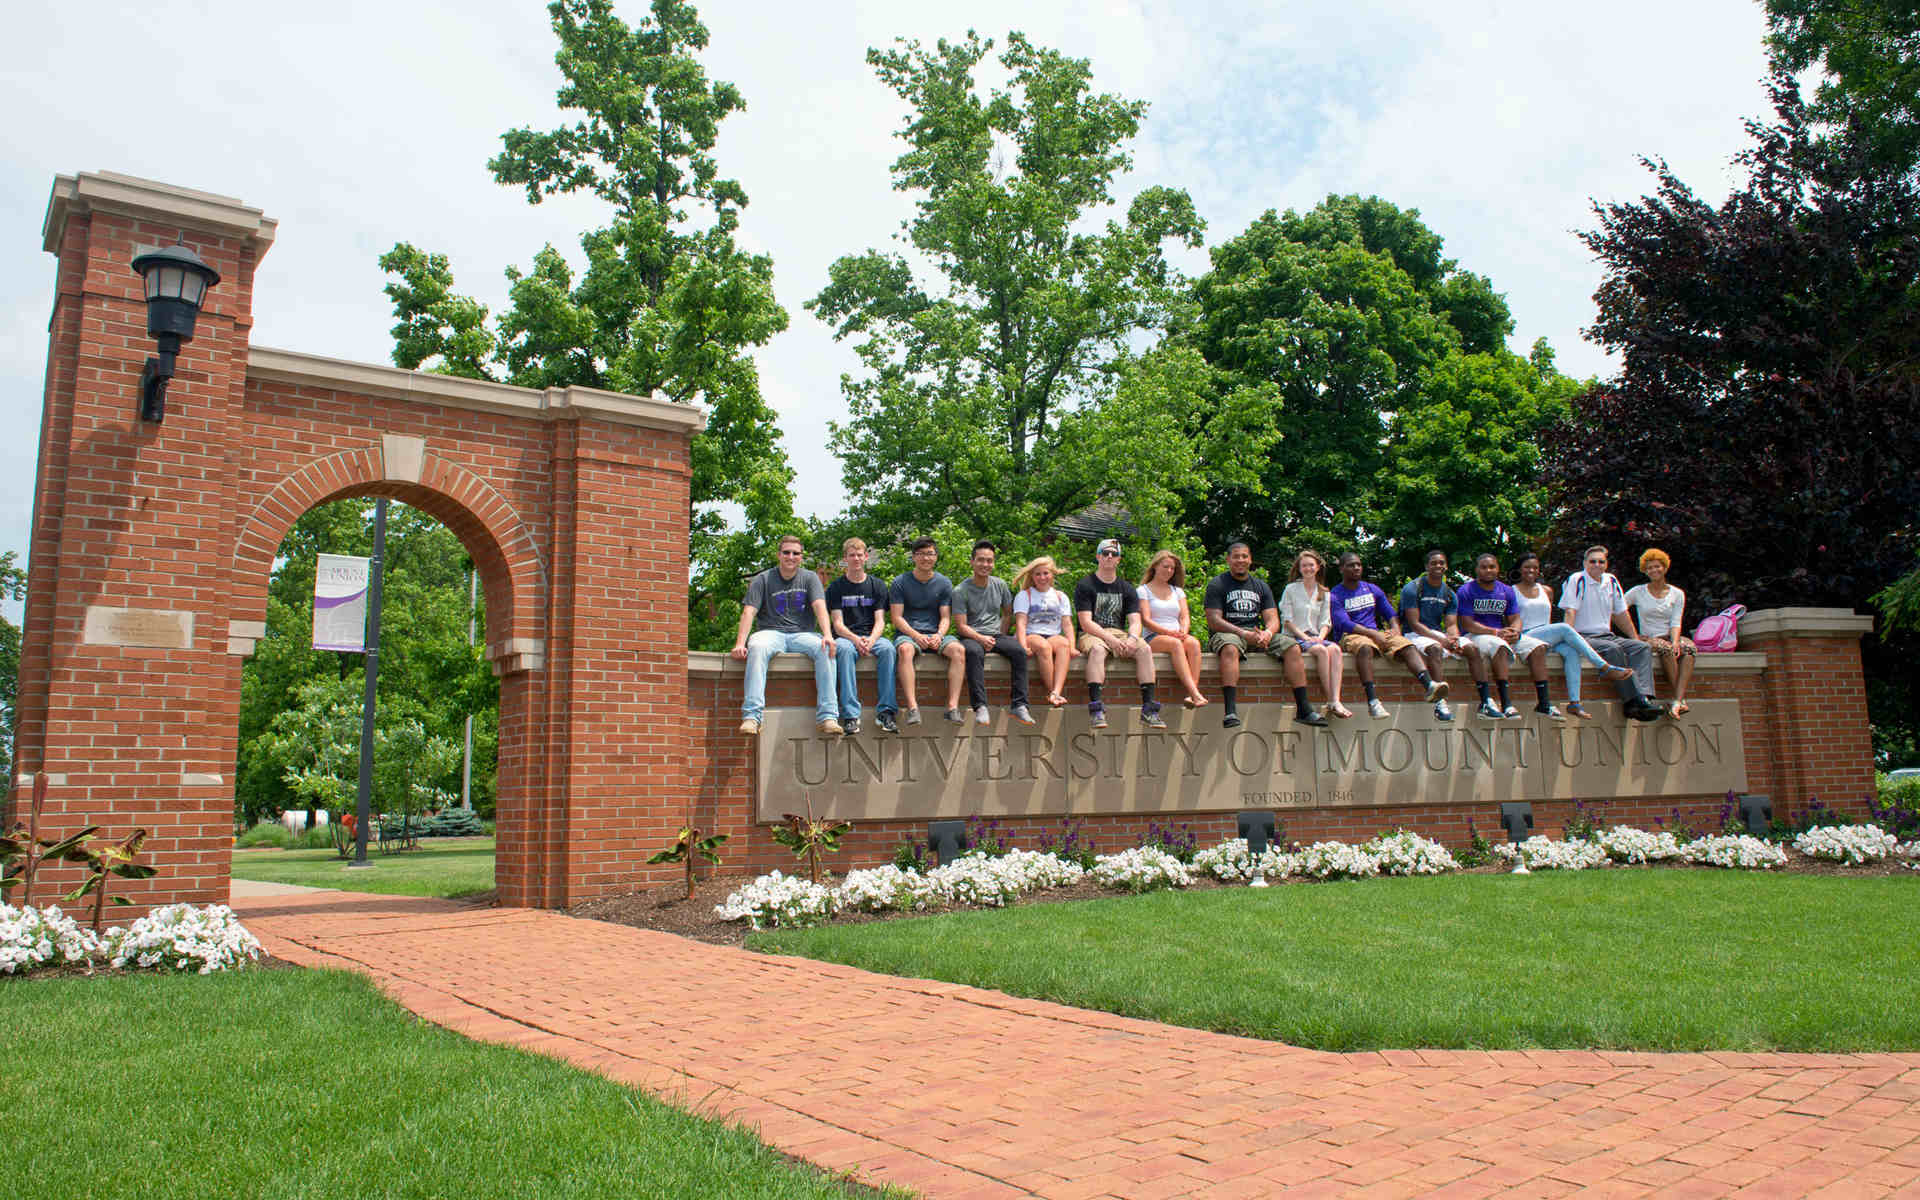 Mount Union students sitting on top of Mount Union gateway.